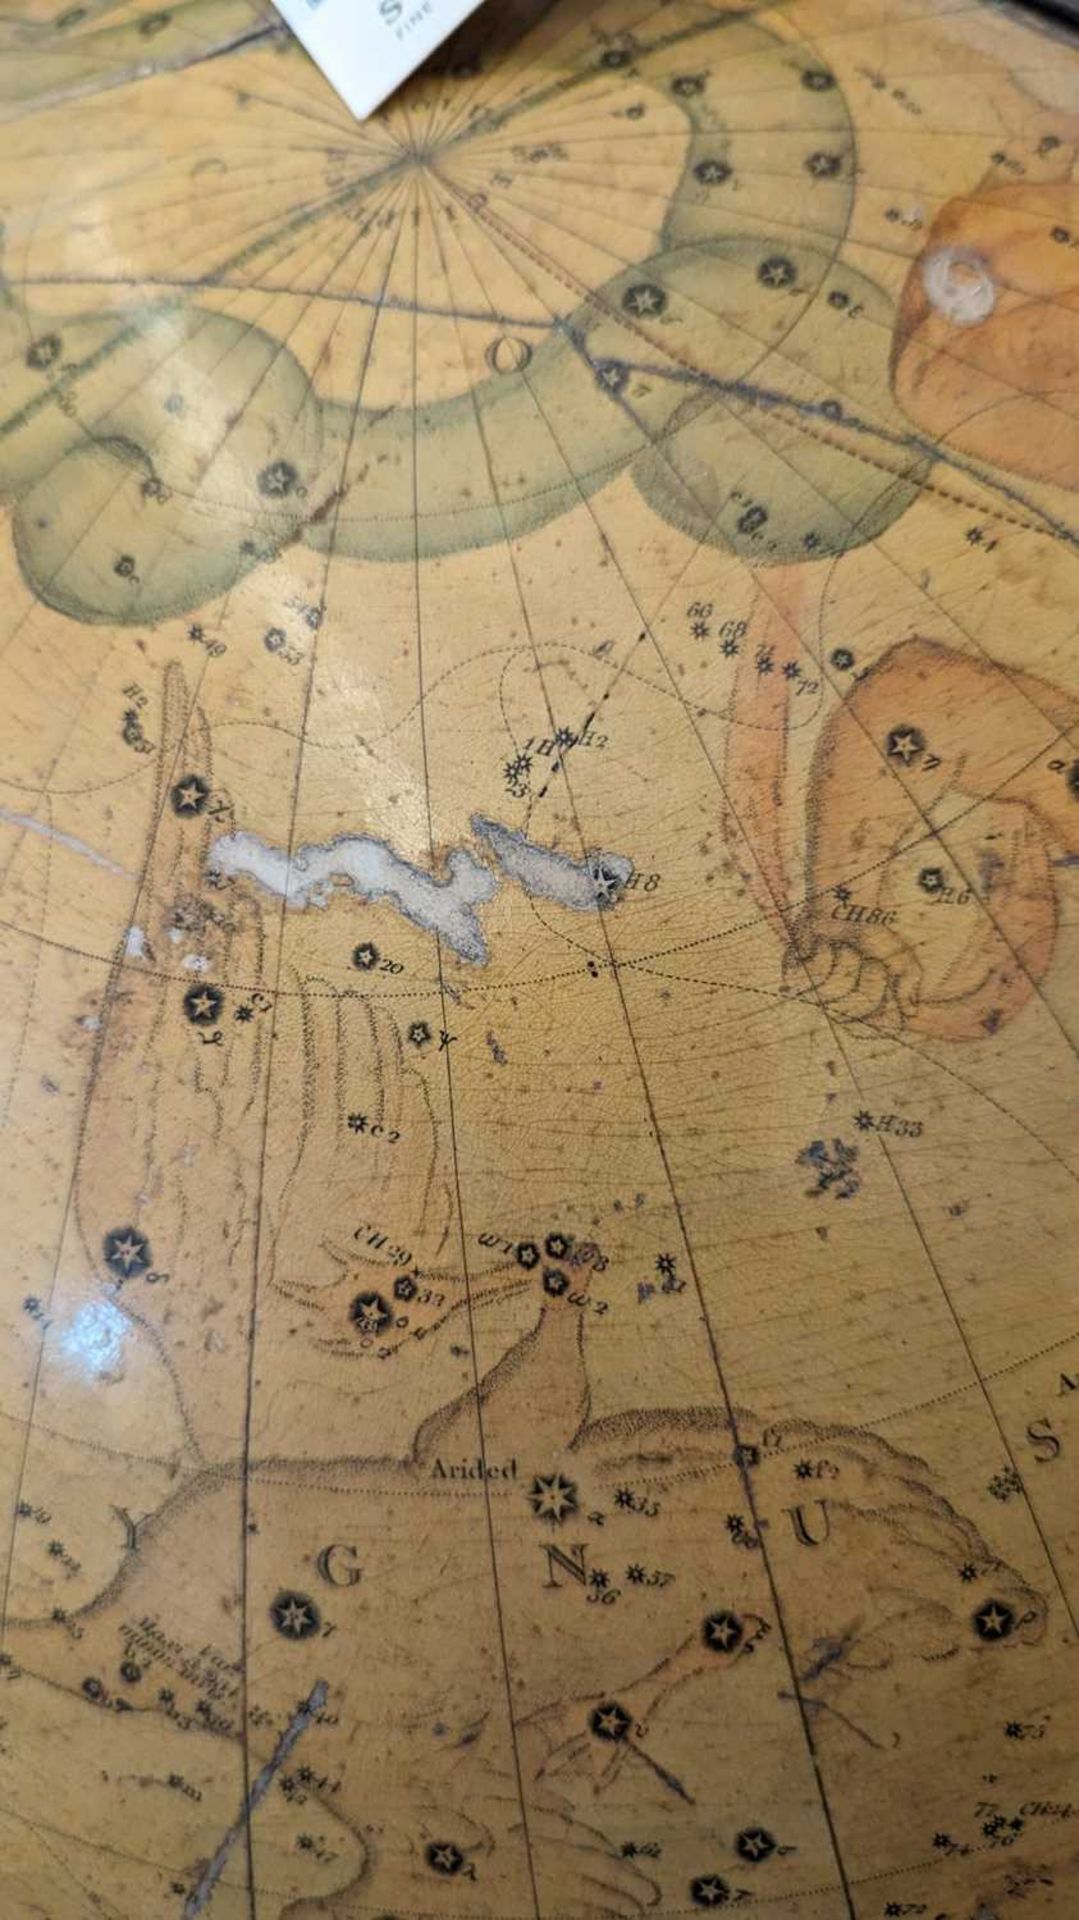 A large celestial library globe by J & W Cary, - Image 16 of 84